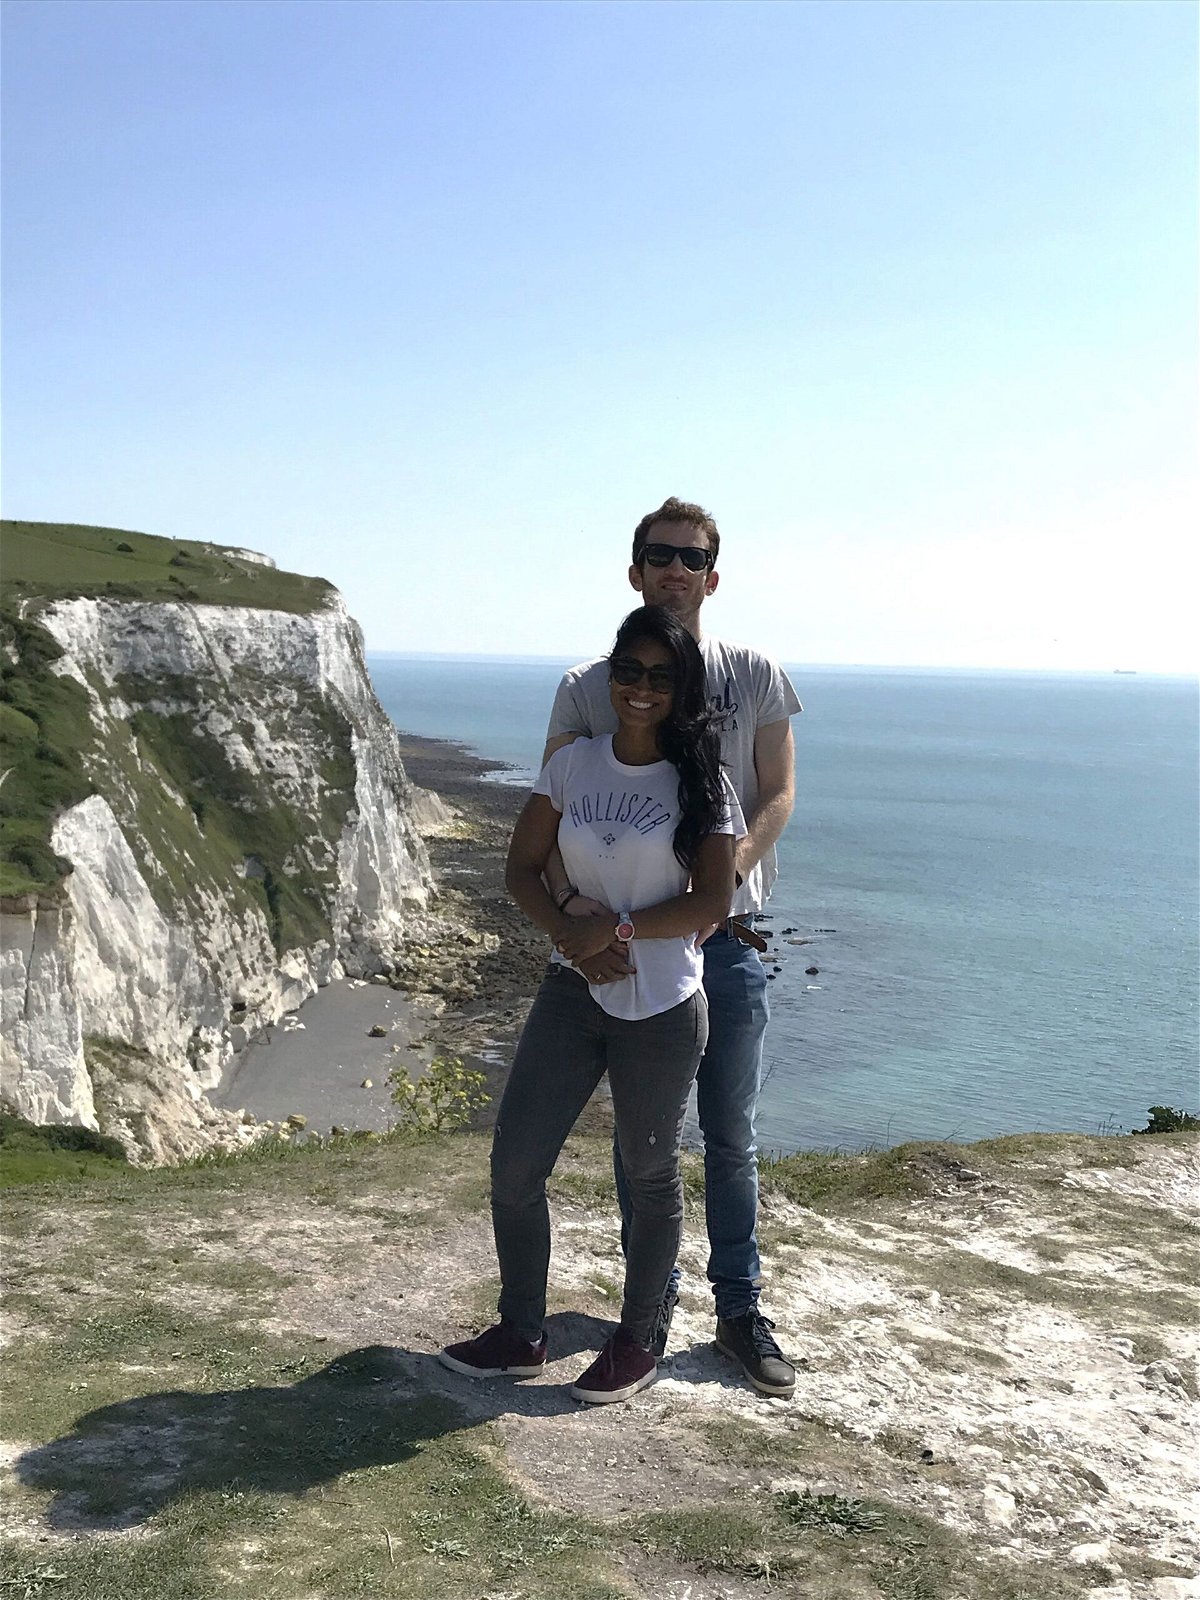 <i>Courtesy Tristano via CNN Newsource</i><br/>Here's Tristano and Alessandra during a trip to the White Cliffs of Dover in the UK.